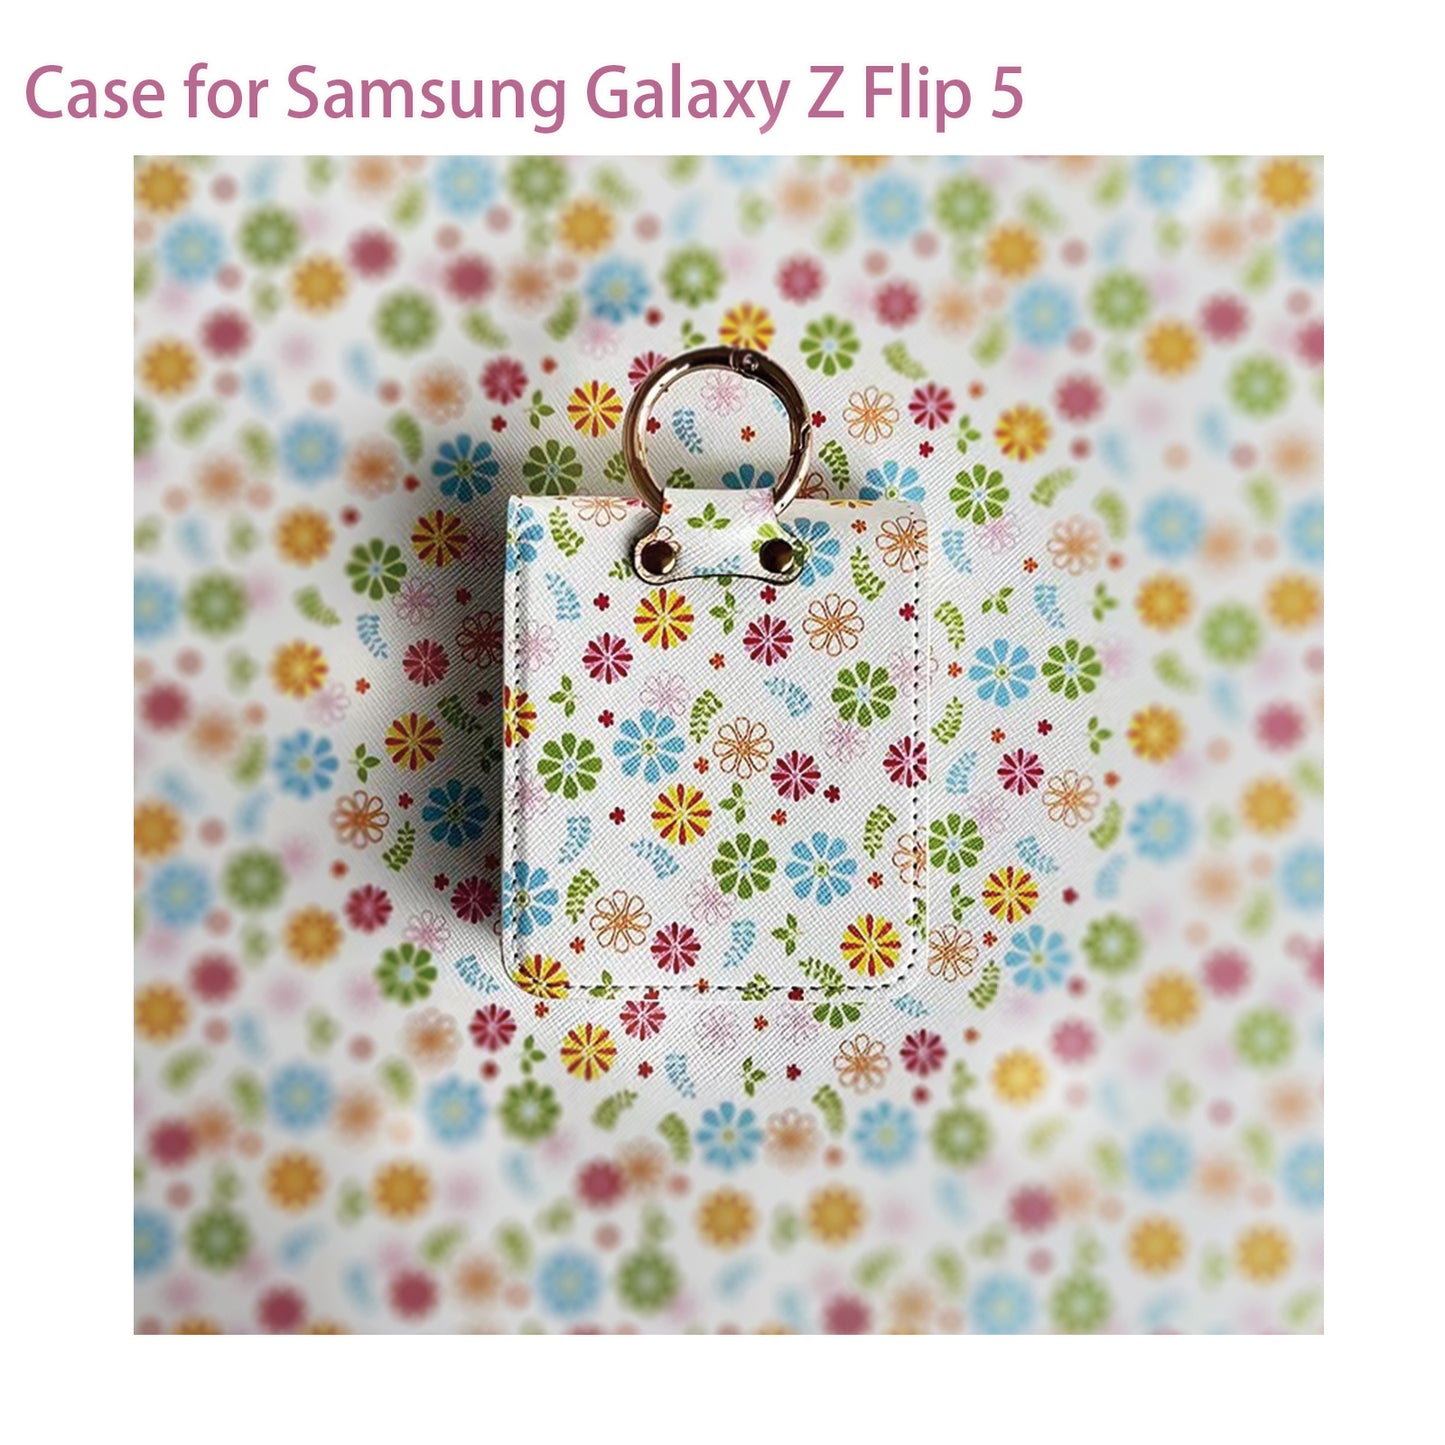 Floral Cases for Samsung Galaxy Z Flip 5 Case with Crossbody Strap